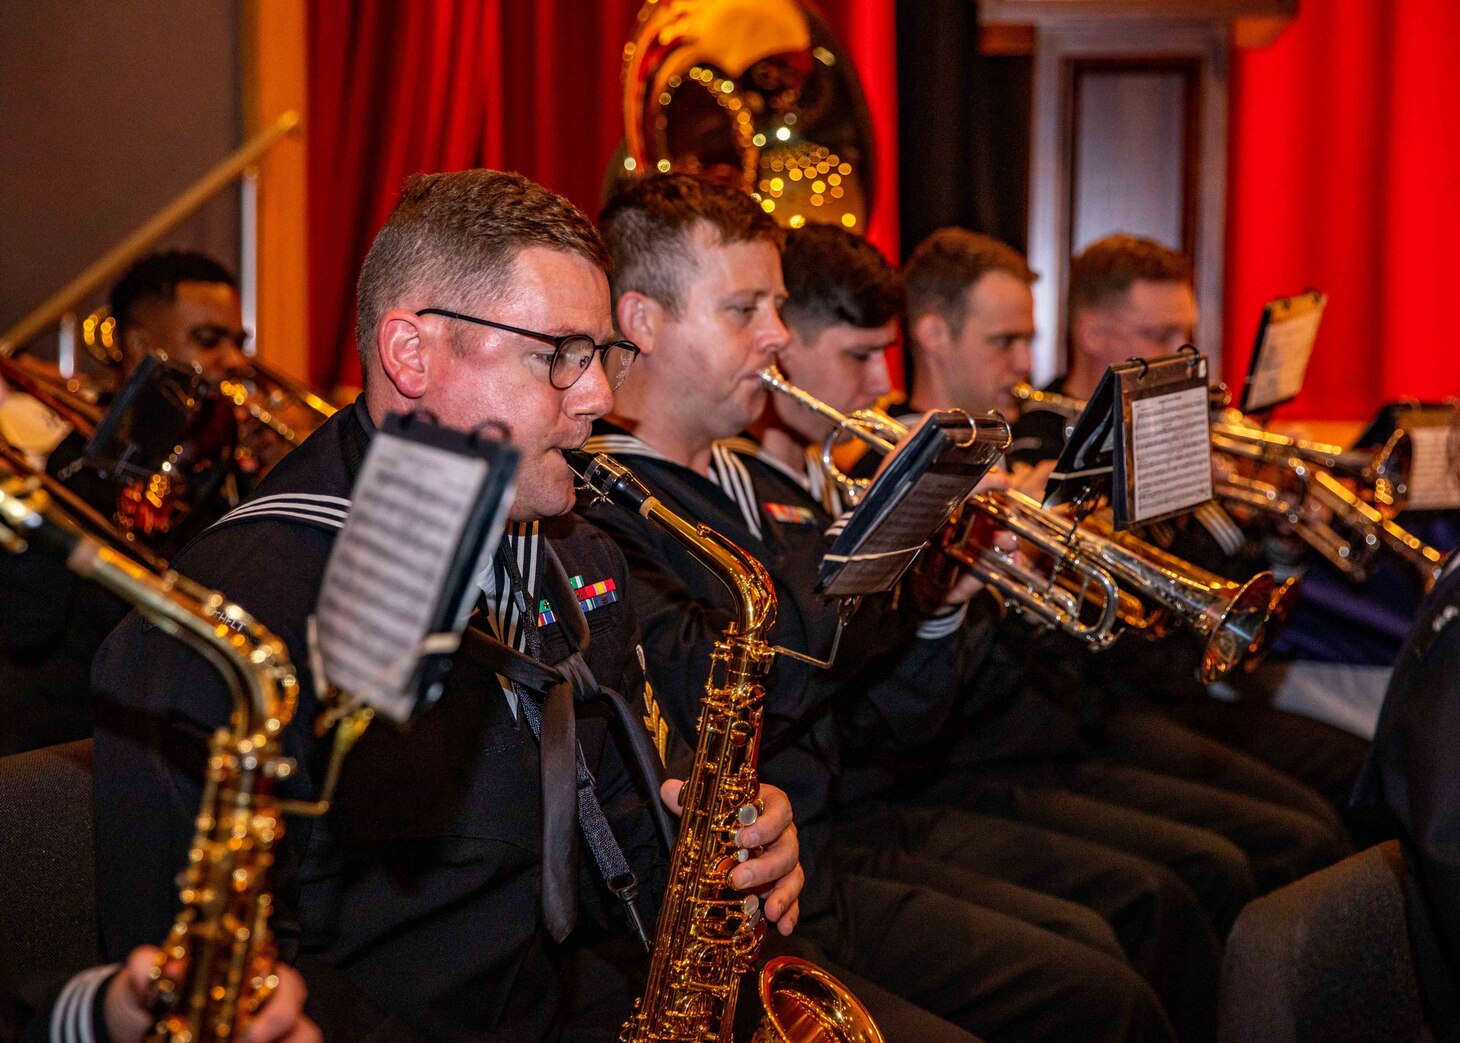 Members of the U.S. 7th Fleet Band perform during the Submarine Group 7 change of command ceremony at Commander, Fleet Activities Yokosuka, Japan, on April 13, 2022. Submarine Group 7 directs forward-deployed, combat capable forces across the full spectrum of undersea warfare throughout the Western Pacific, Indian Ocean, and Arabian Sea.